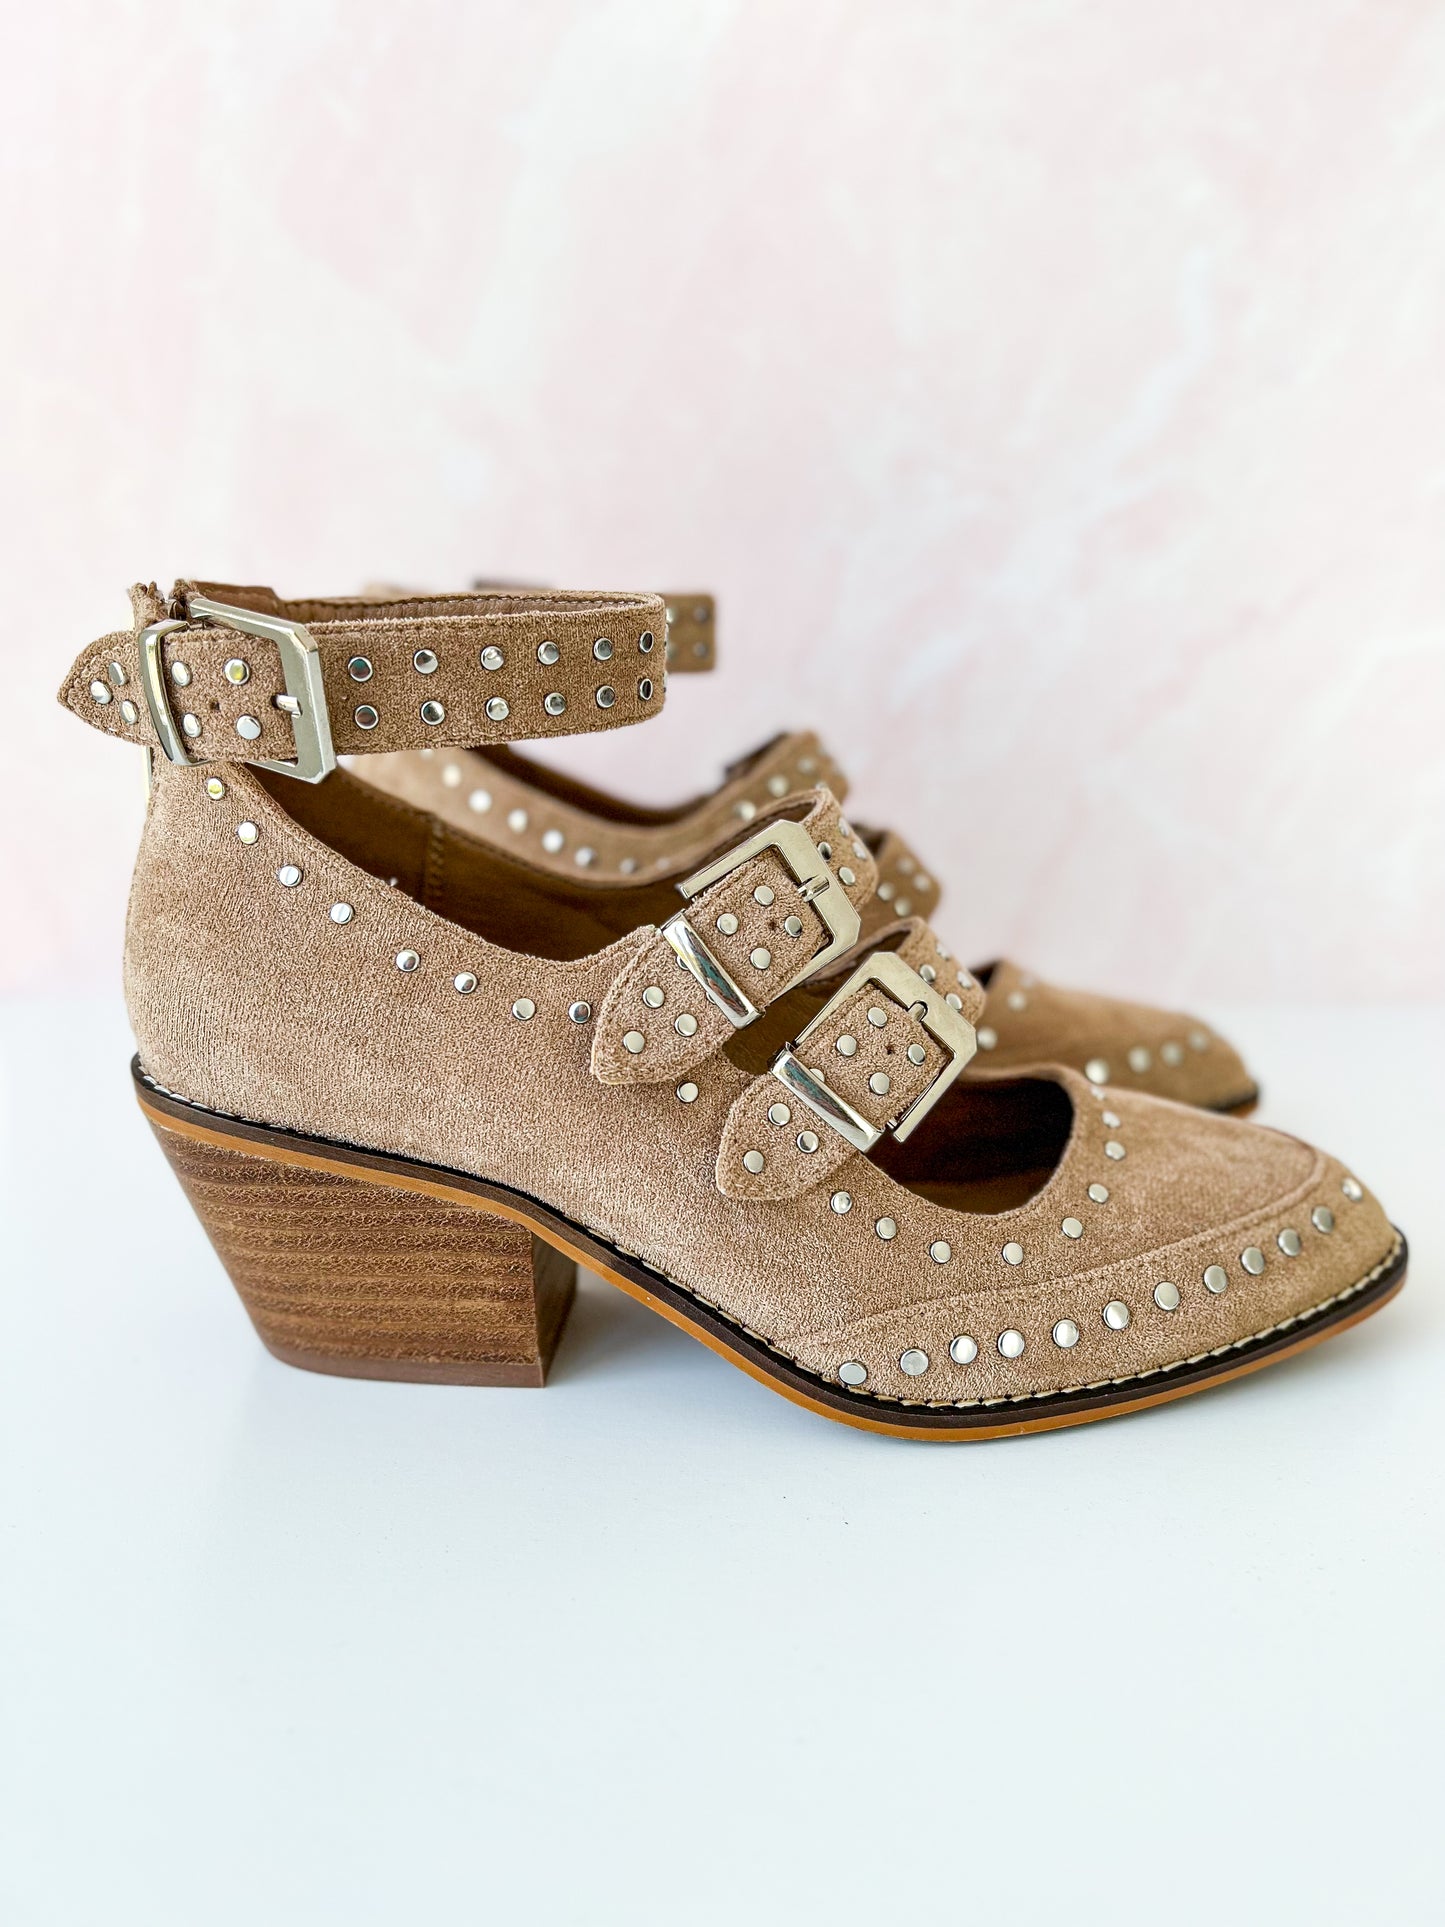 Corky's Cackle Wedge - Sand Suede  - Final Sale